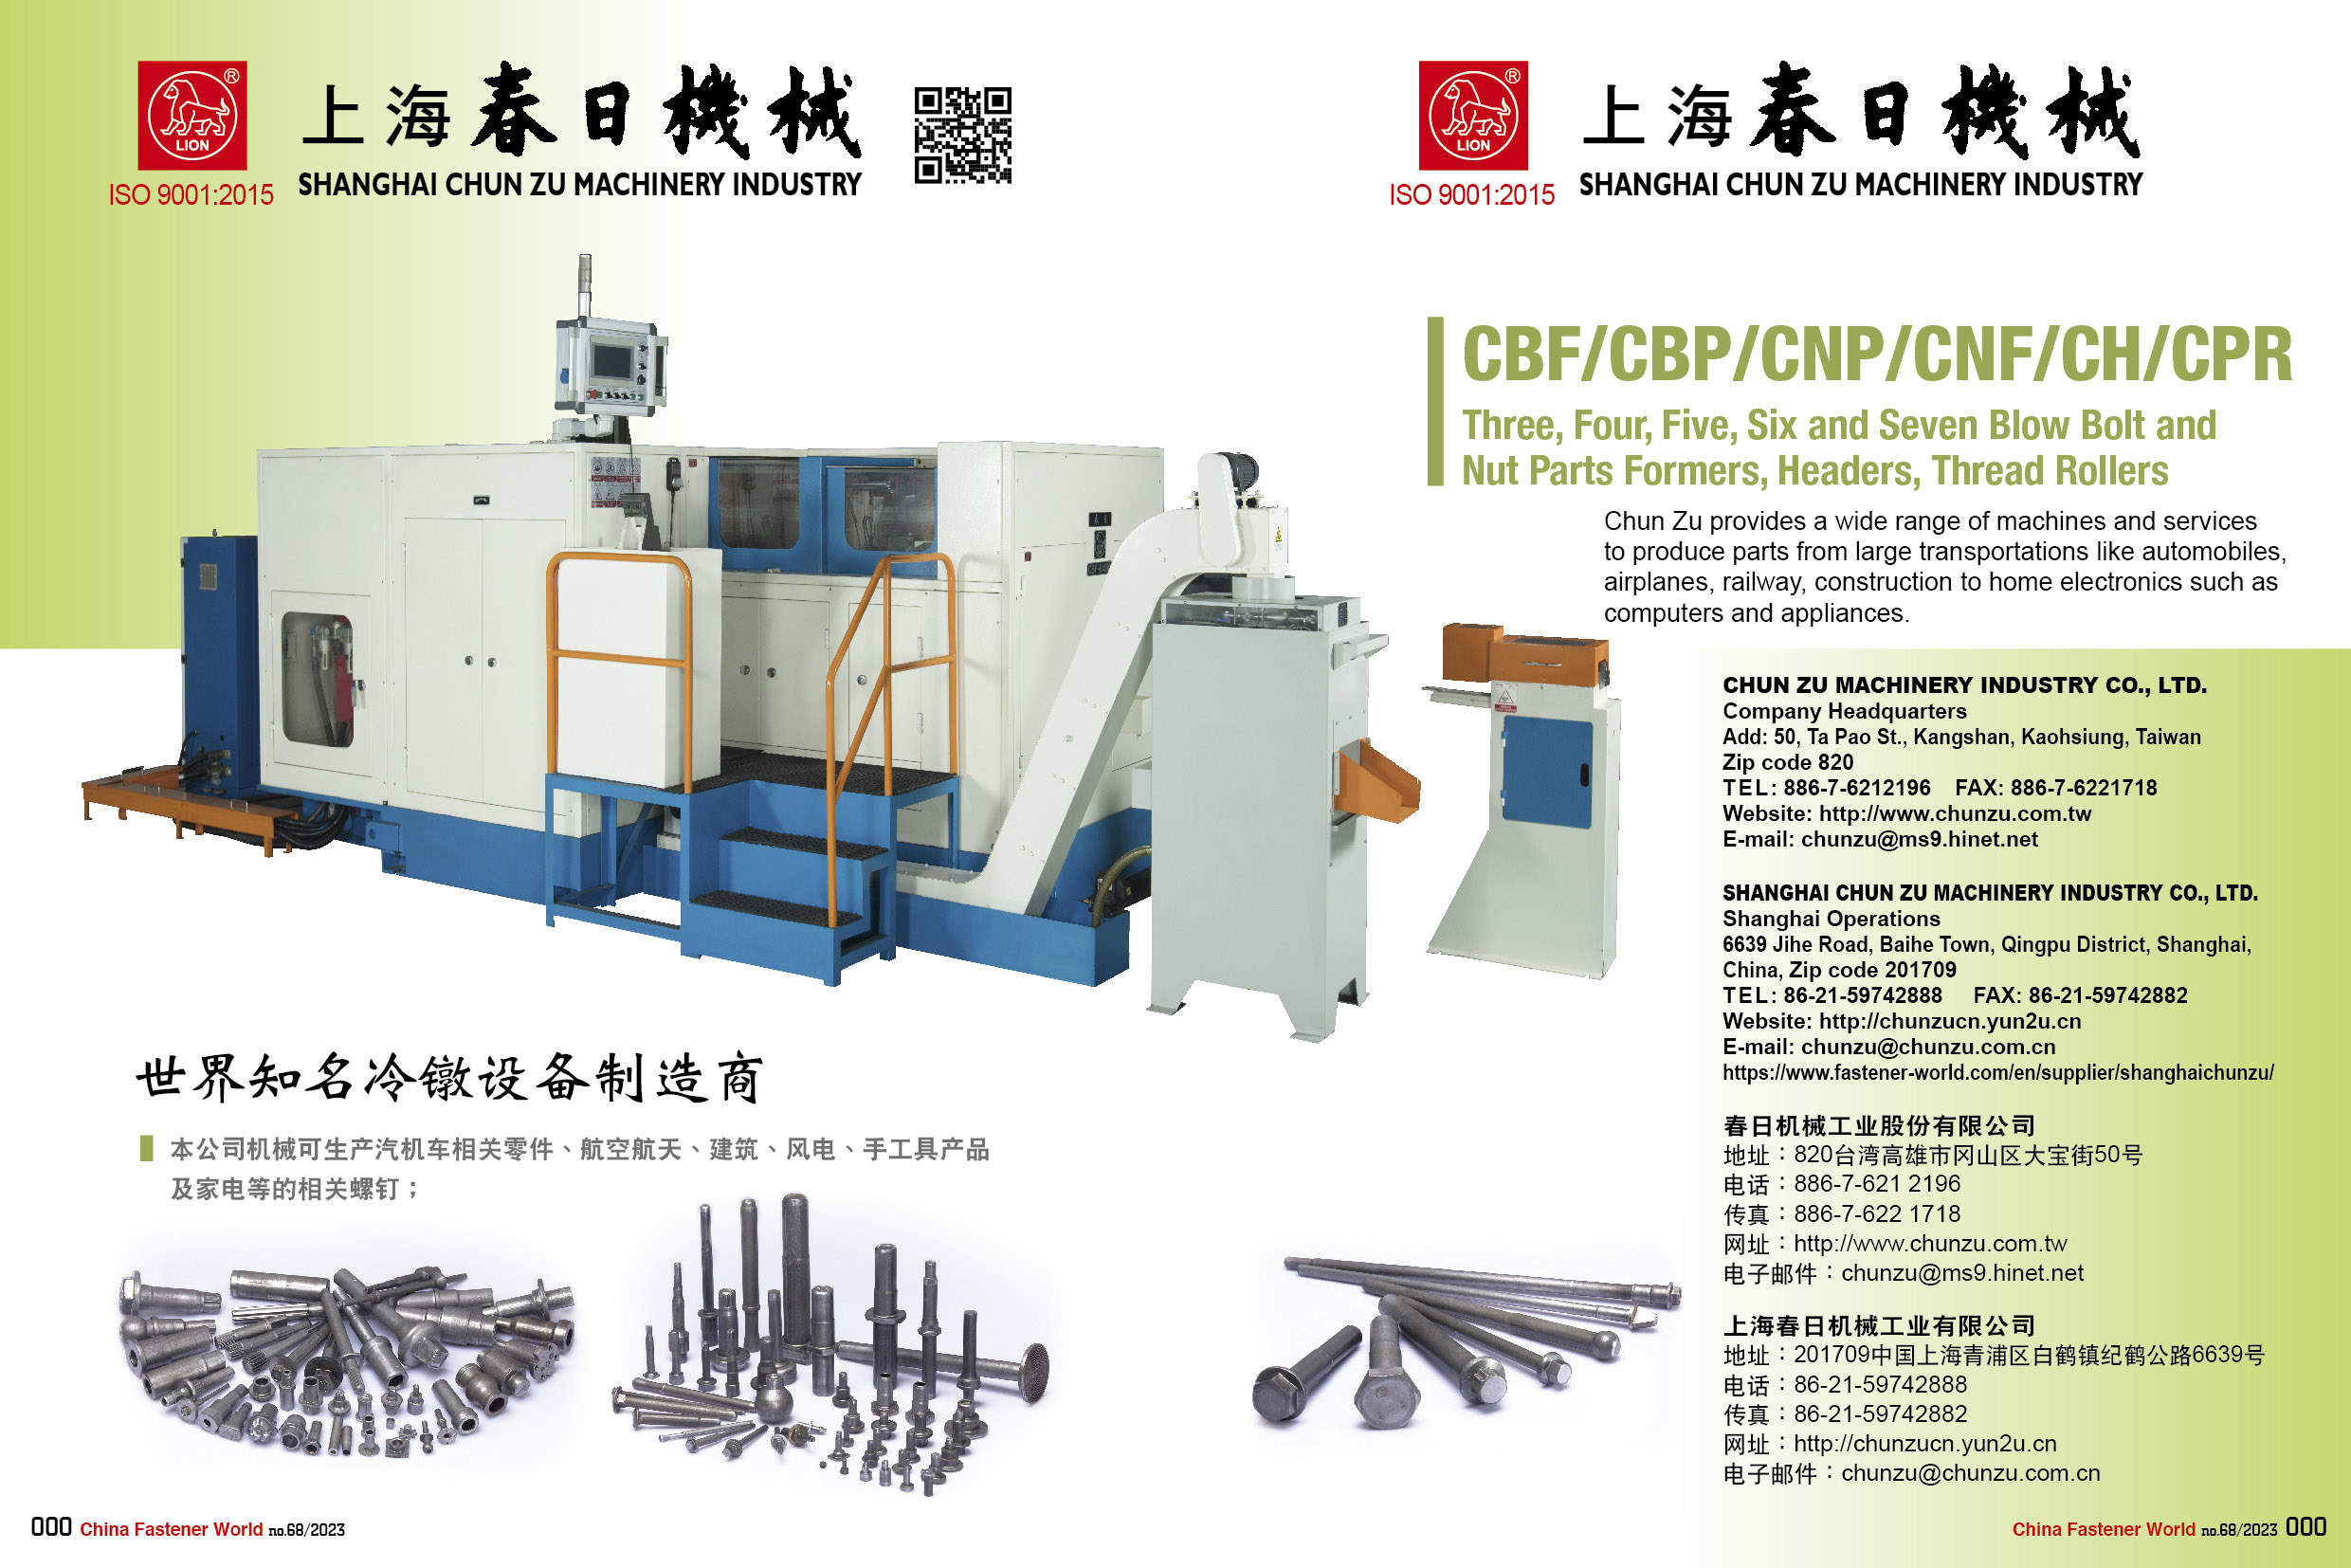 SHANGHAI CHUN ZU MACHINERY INDUSTRY CO.,LTD. , CBF/CBP/CNP Three, Four, Five and Six Blow Bolt and Nut Parts Formers